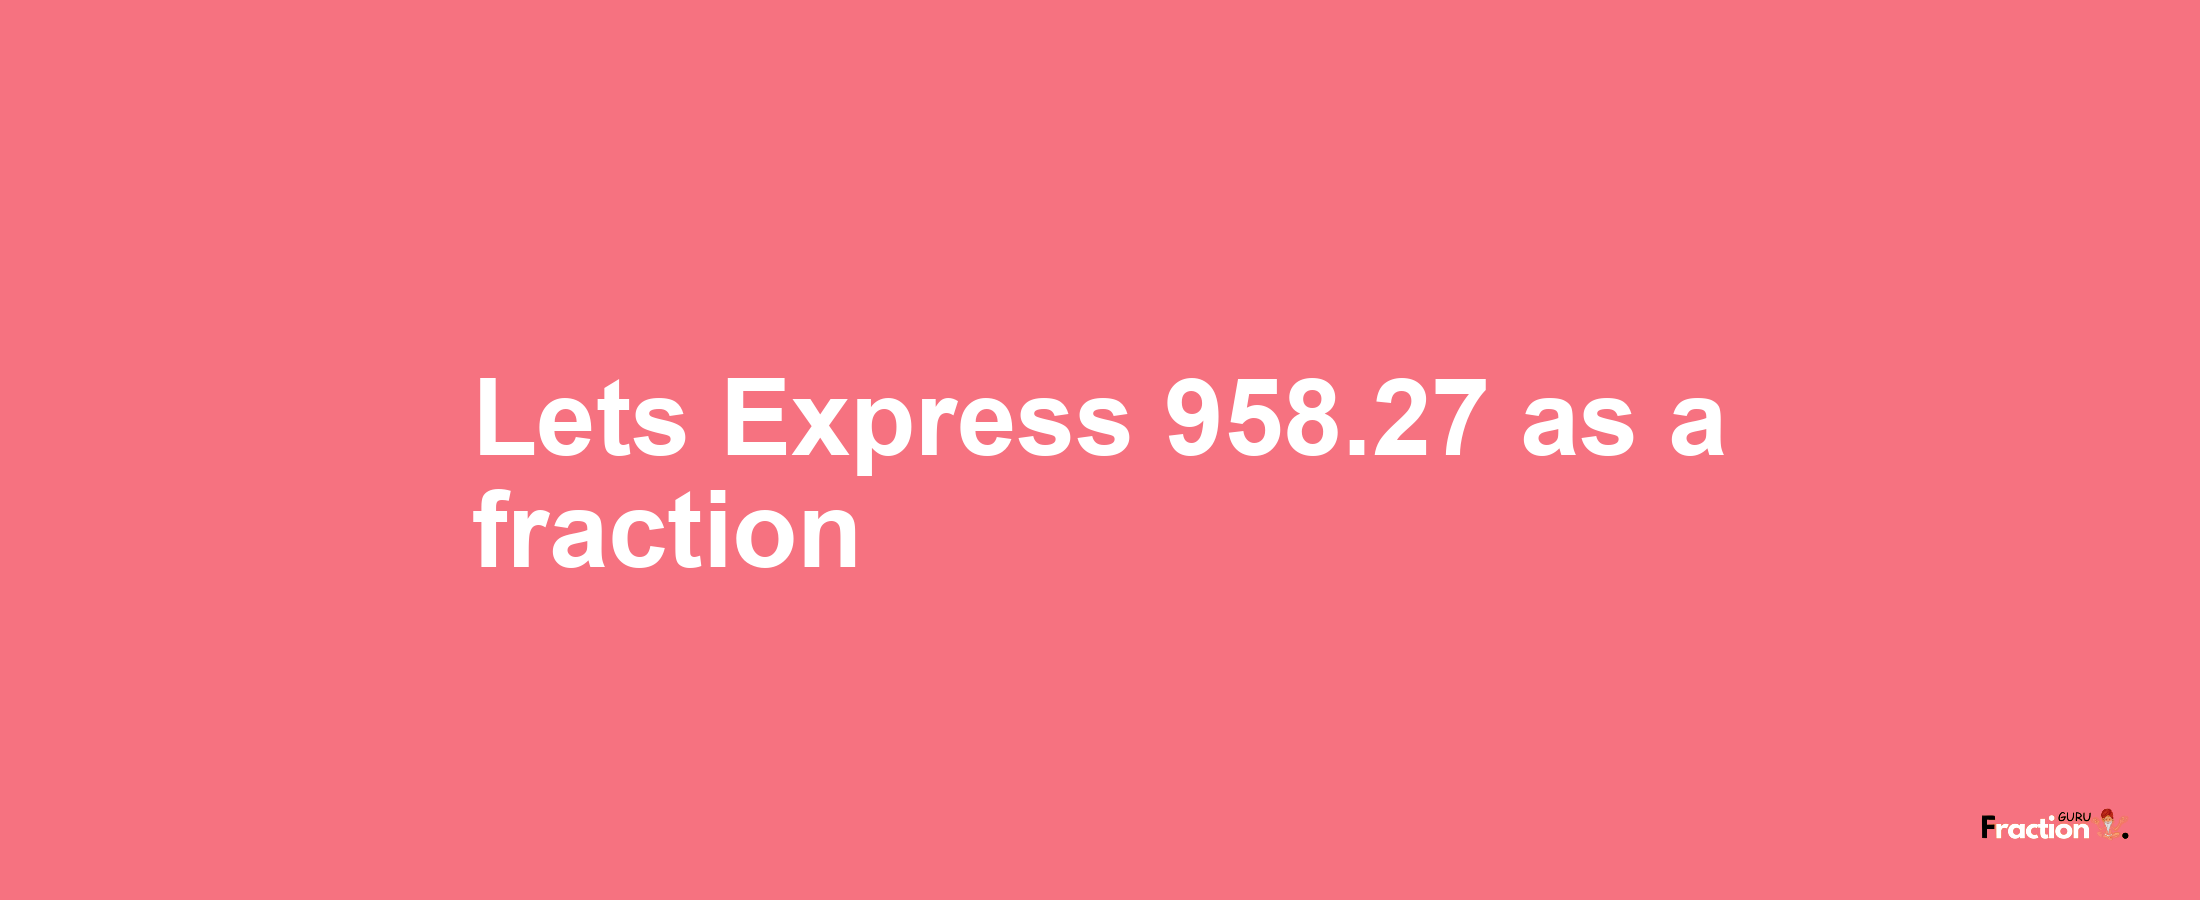 Lets Express 958.27 as afraction